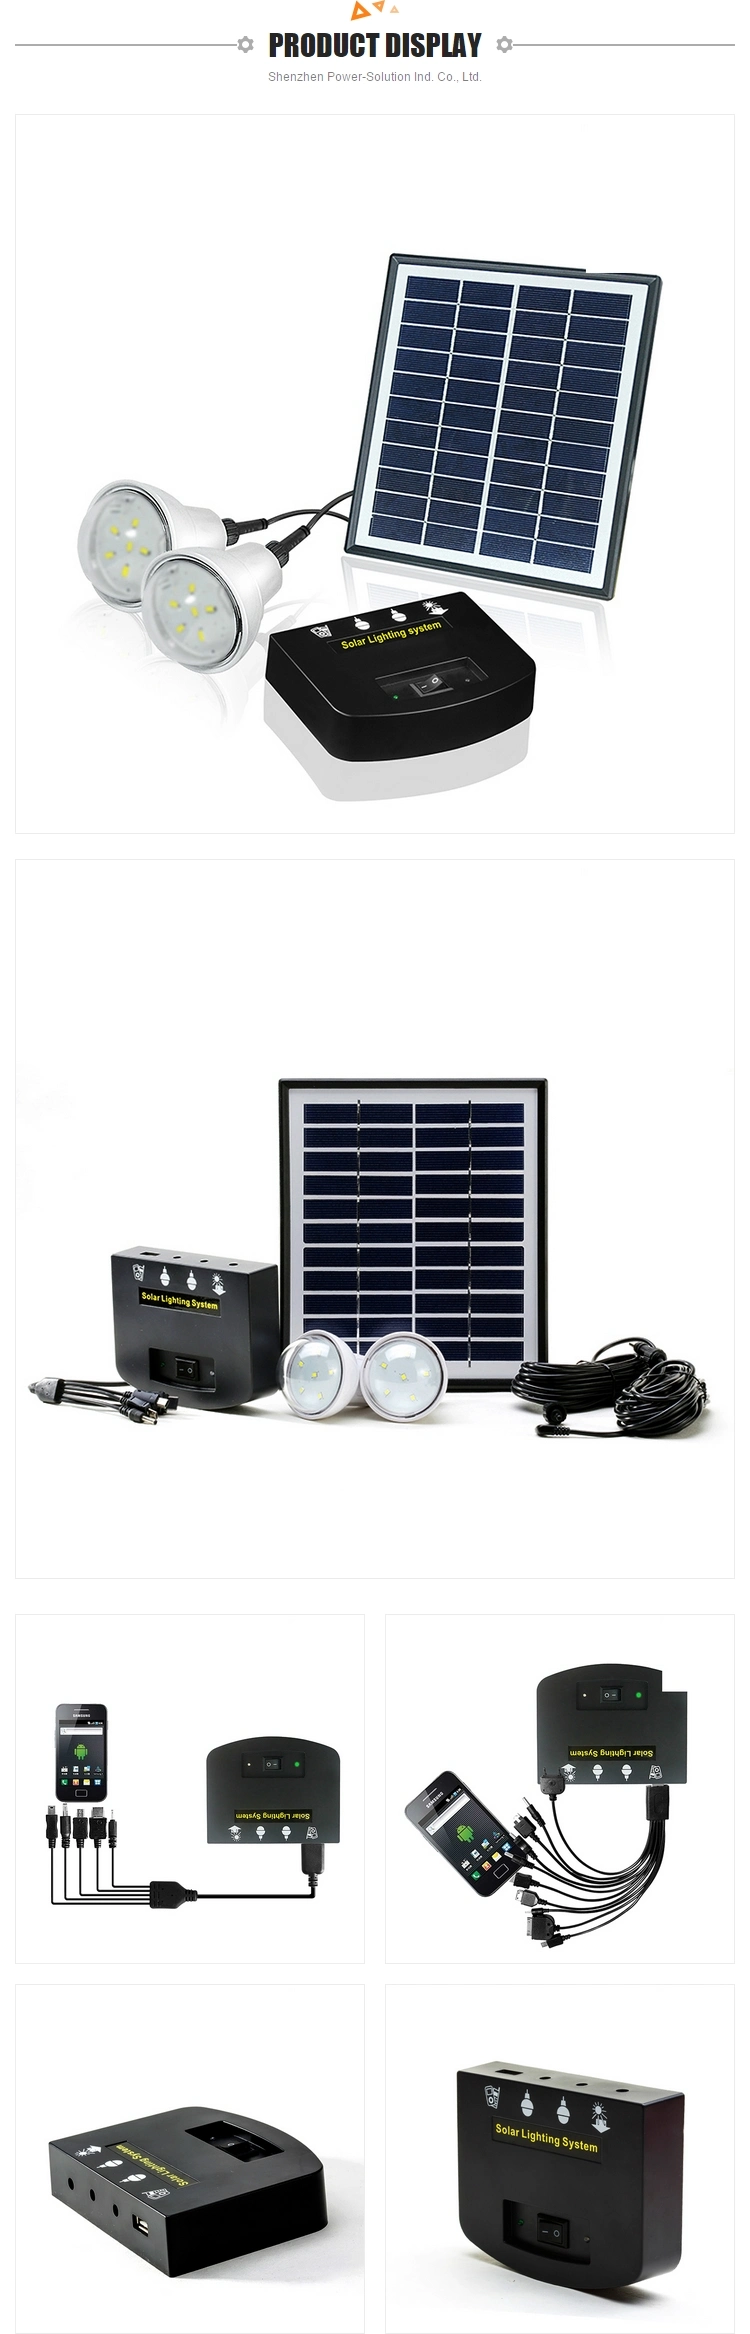 Solar Lighting Kit Solar LED Solar Lighting LED Lamp for Home Use